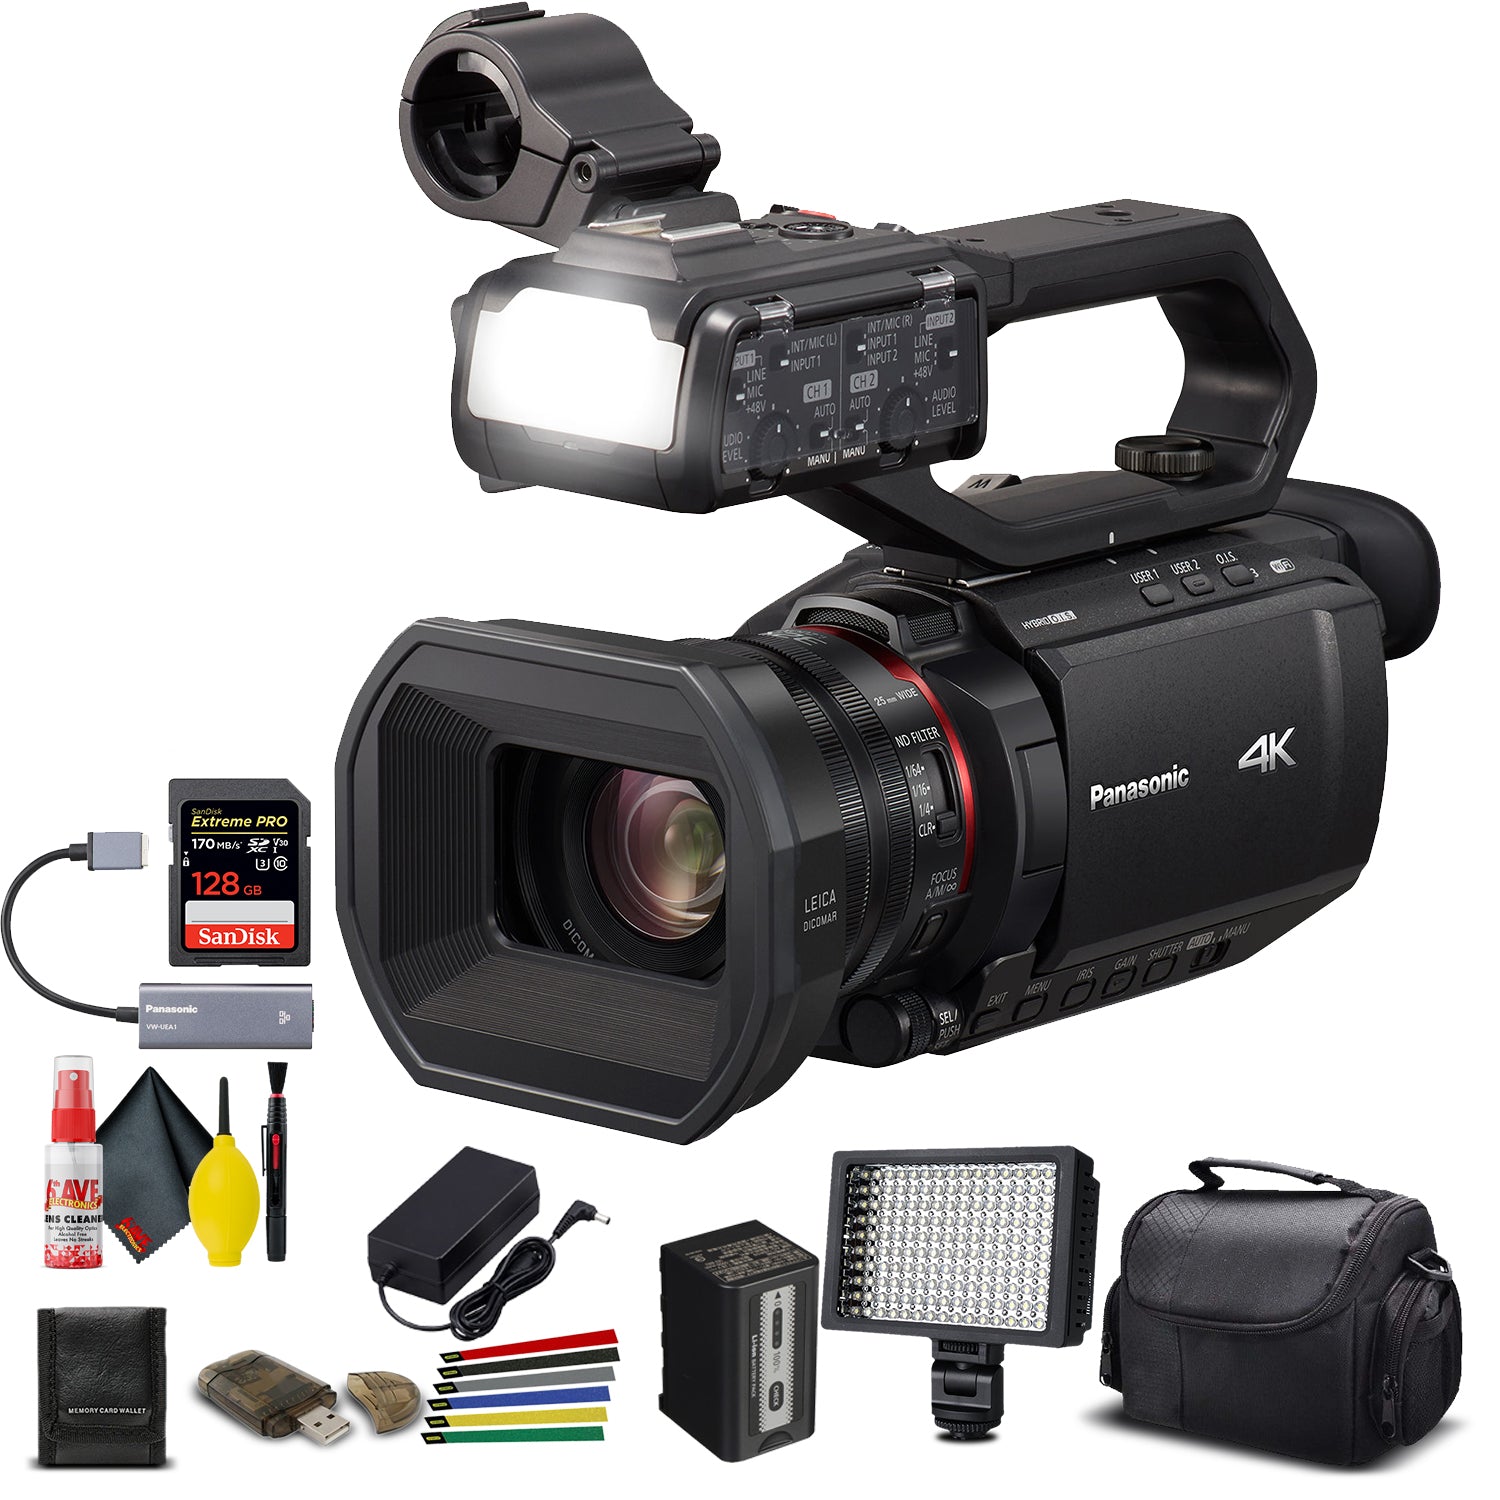 Panasonic AG-CX10 4K Camcorder + Padded Case, Sandisk Extreme Pro 128 GB Memory Card, Wire Straps, LED Light, And More?